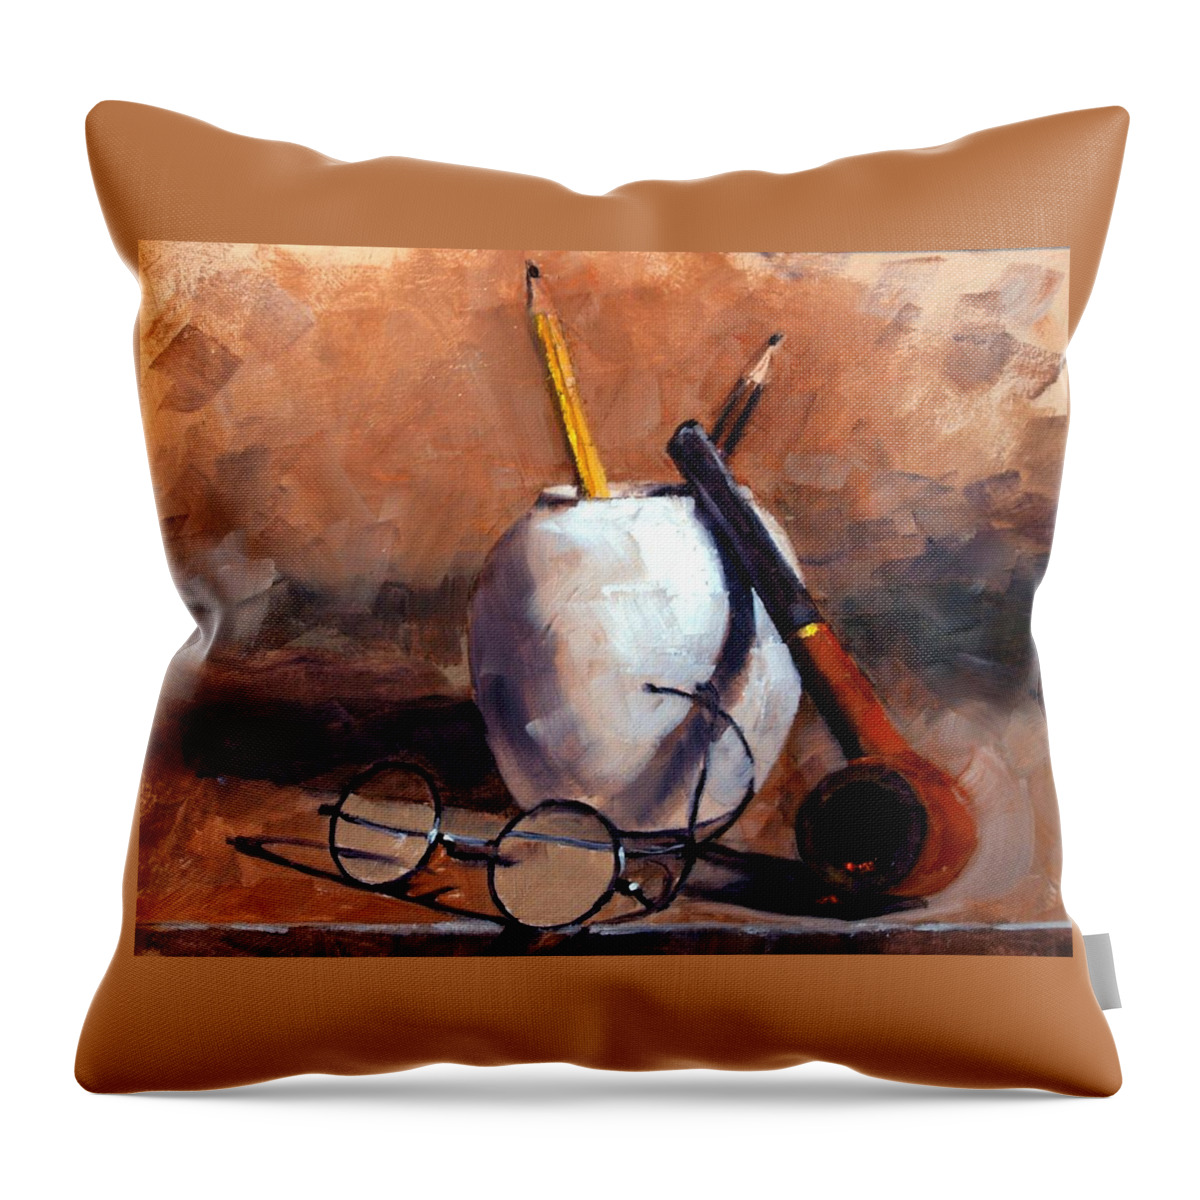 Still Life Throw Pillow featuring the painting Pencils and Pipe by Jim Gola